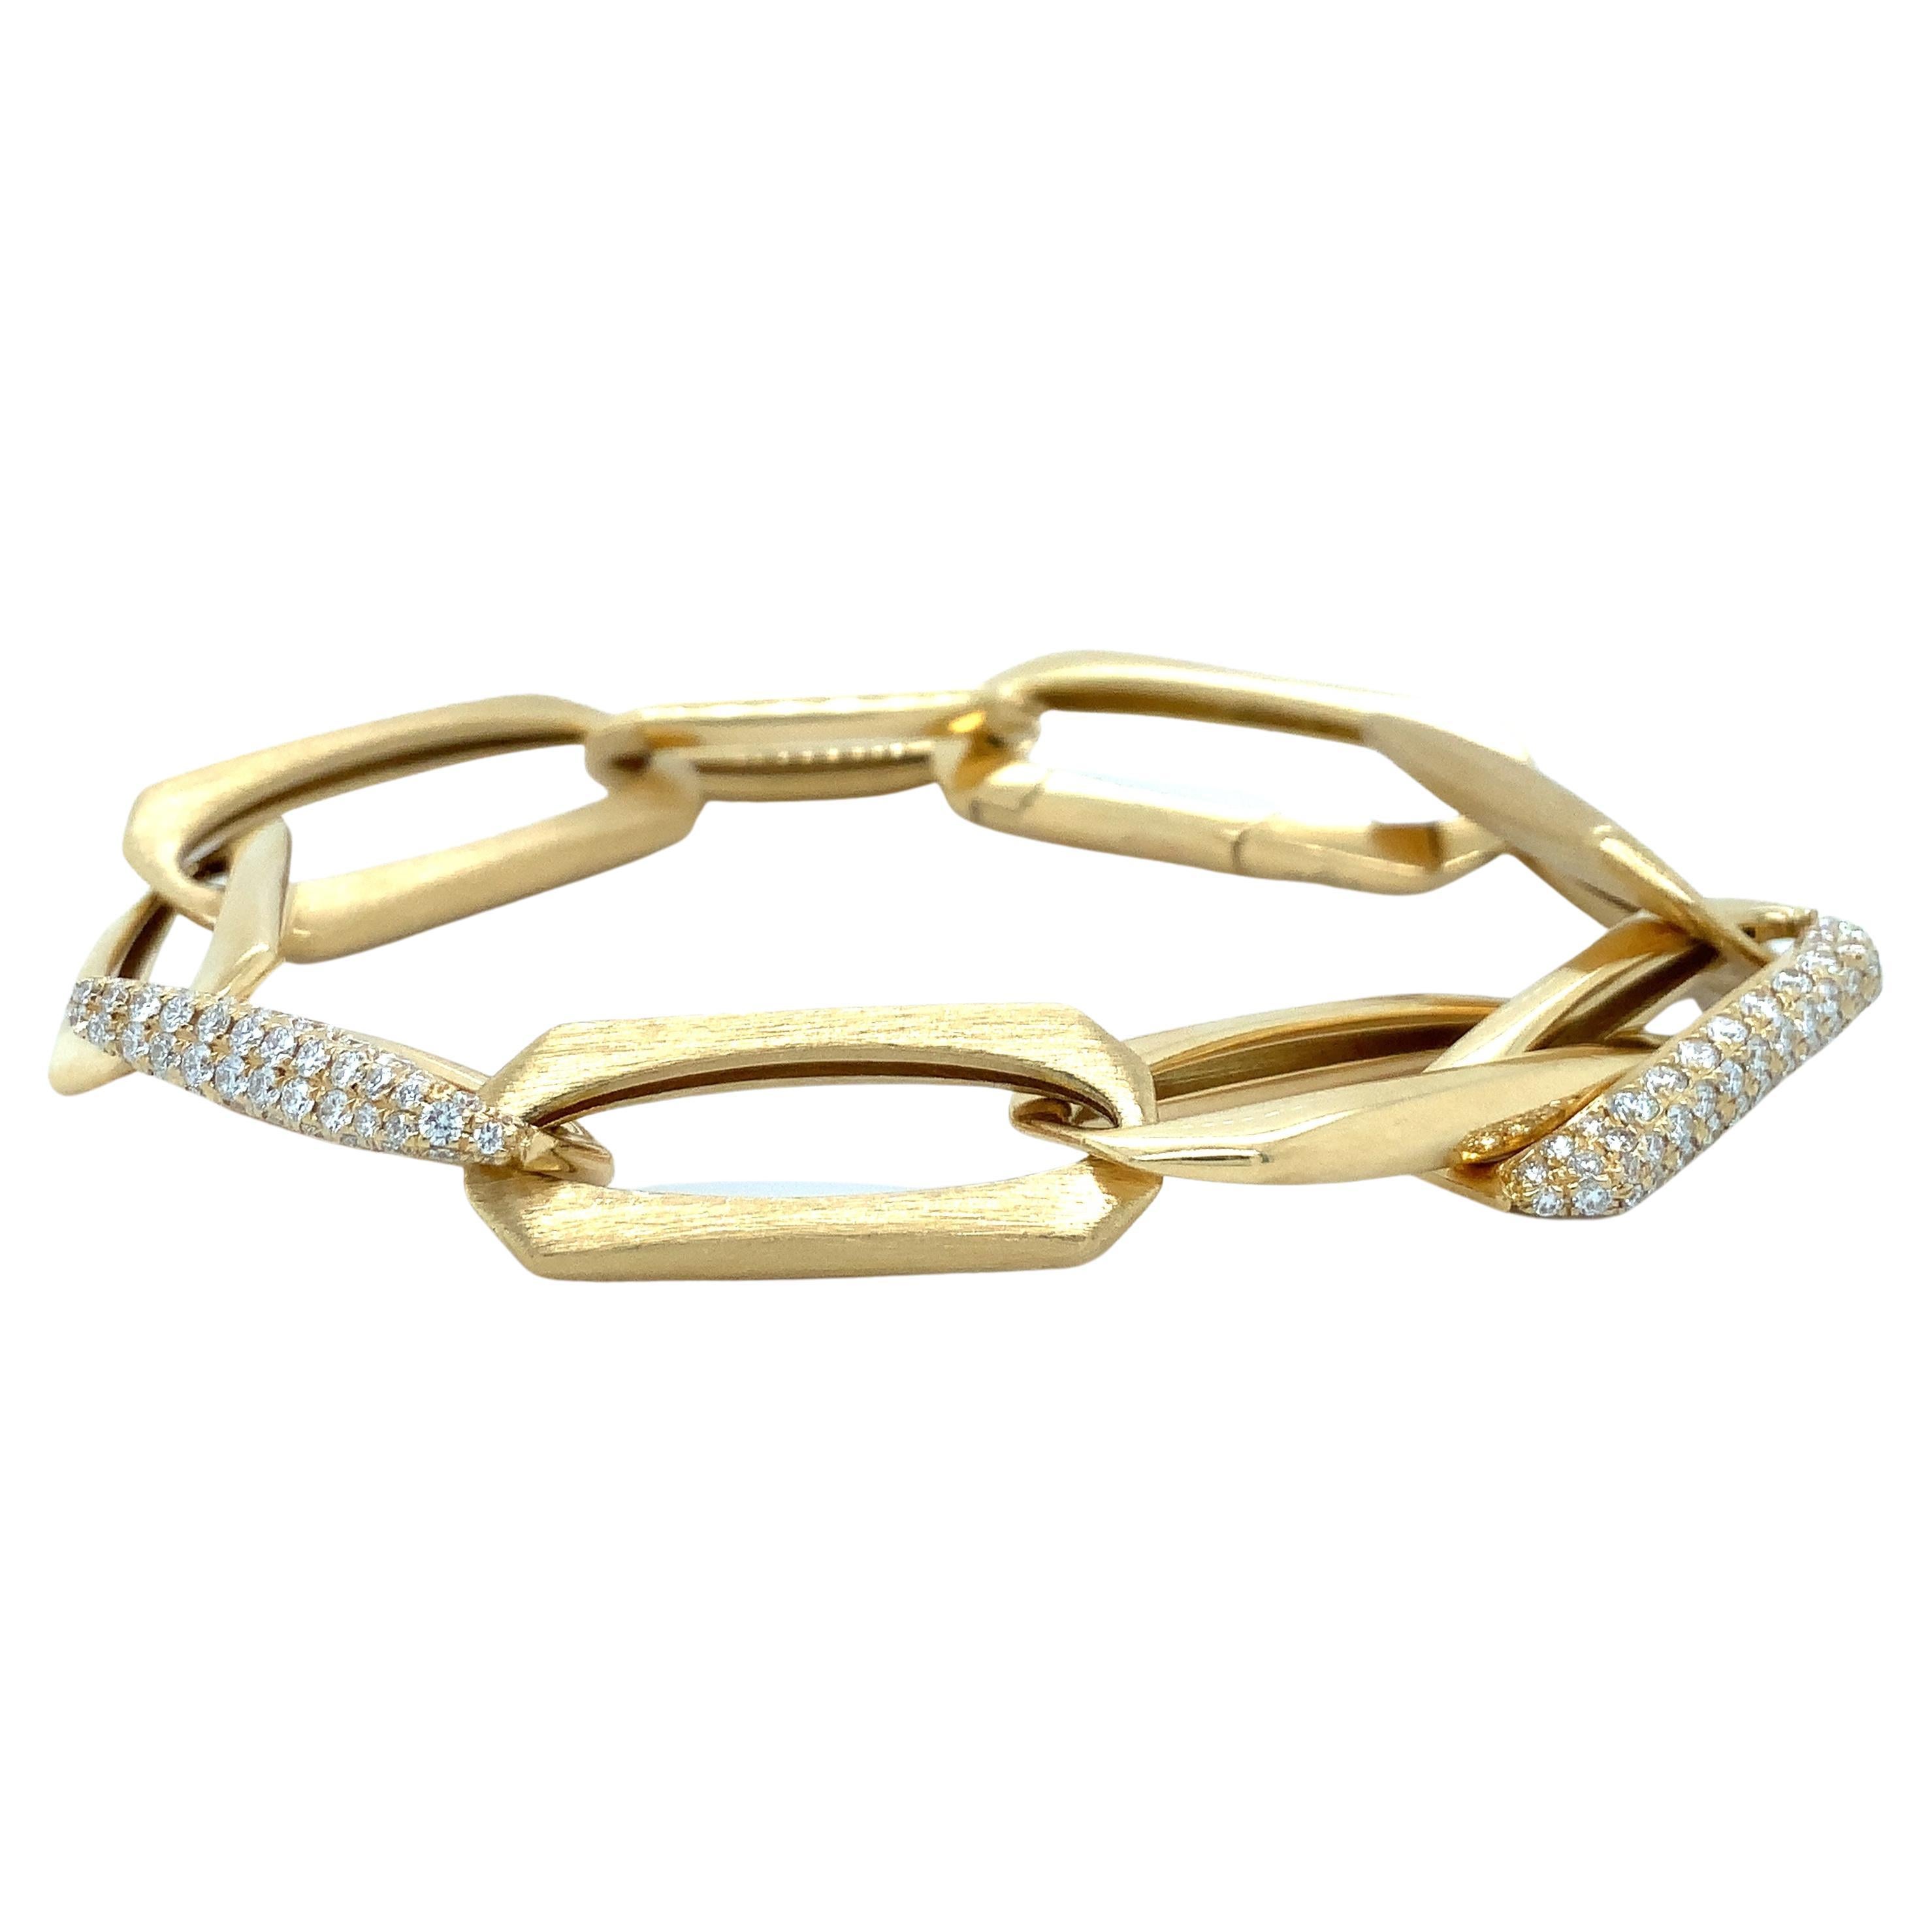 Afarin Collection Pavé Diamond 1.72cts Paperclip Bracelet Set in 18k Yellow Gold